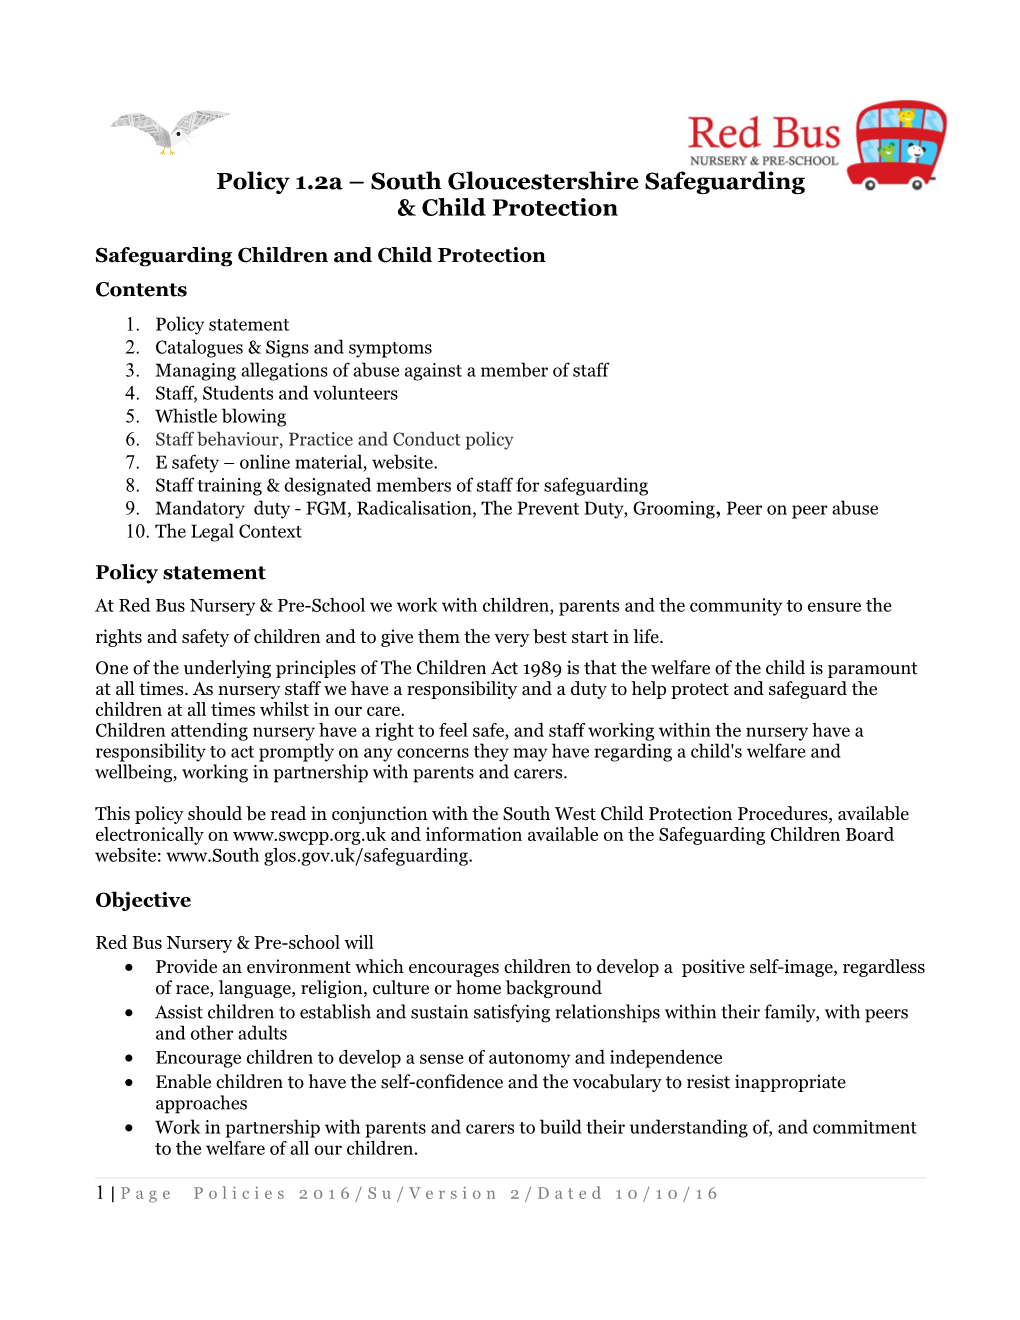 Policy 1.2A South Gloucestershire Safeguarding